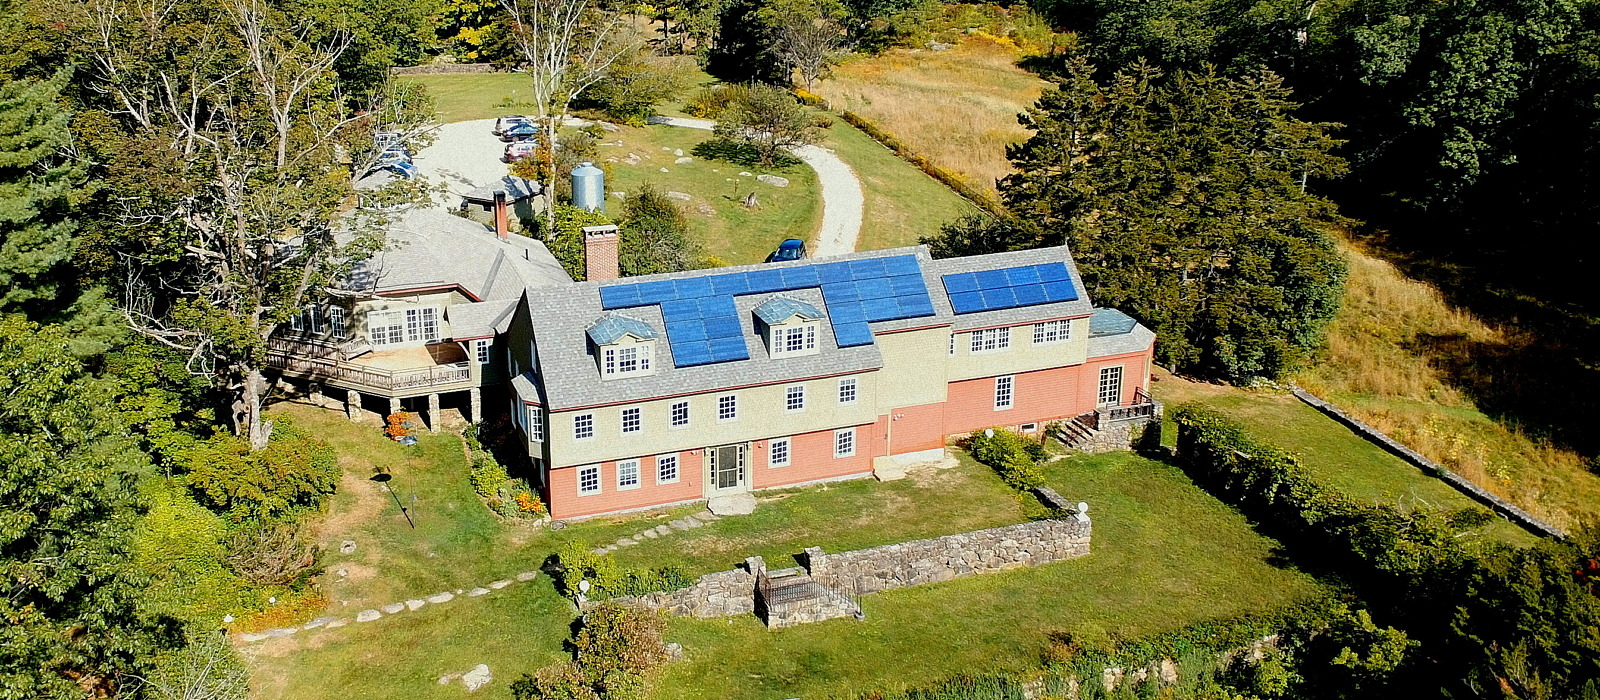 An aerial view of the Harris Center building, showing the its rooftop solar array.